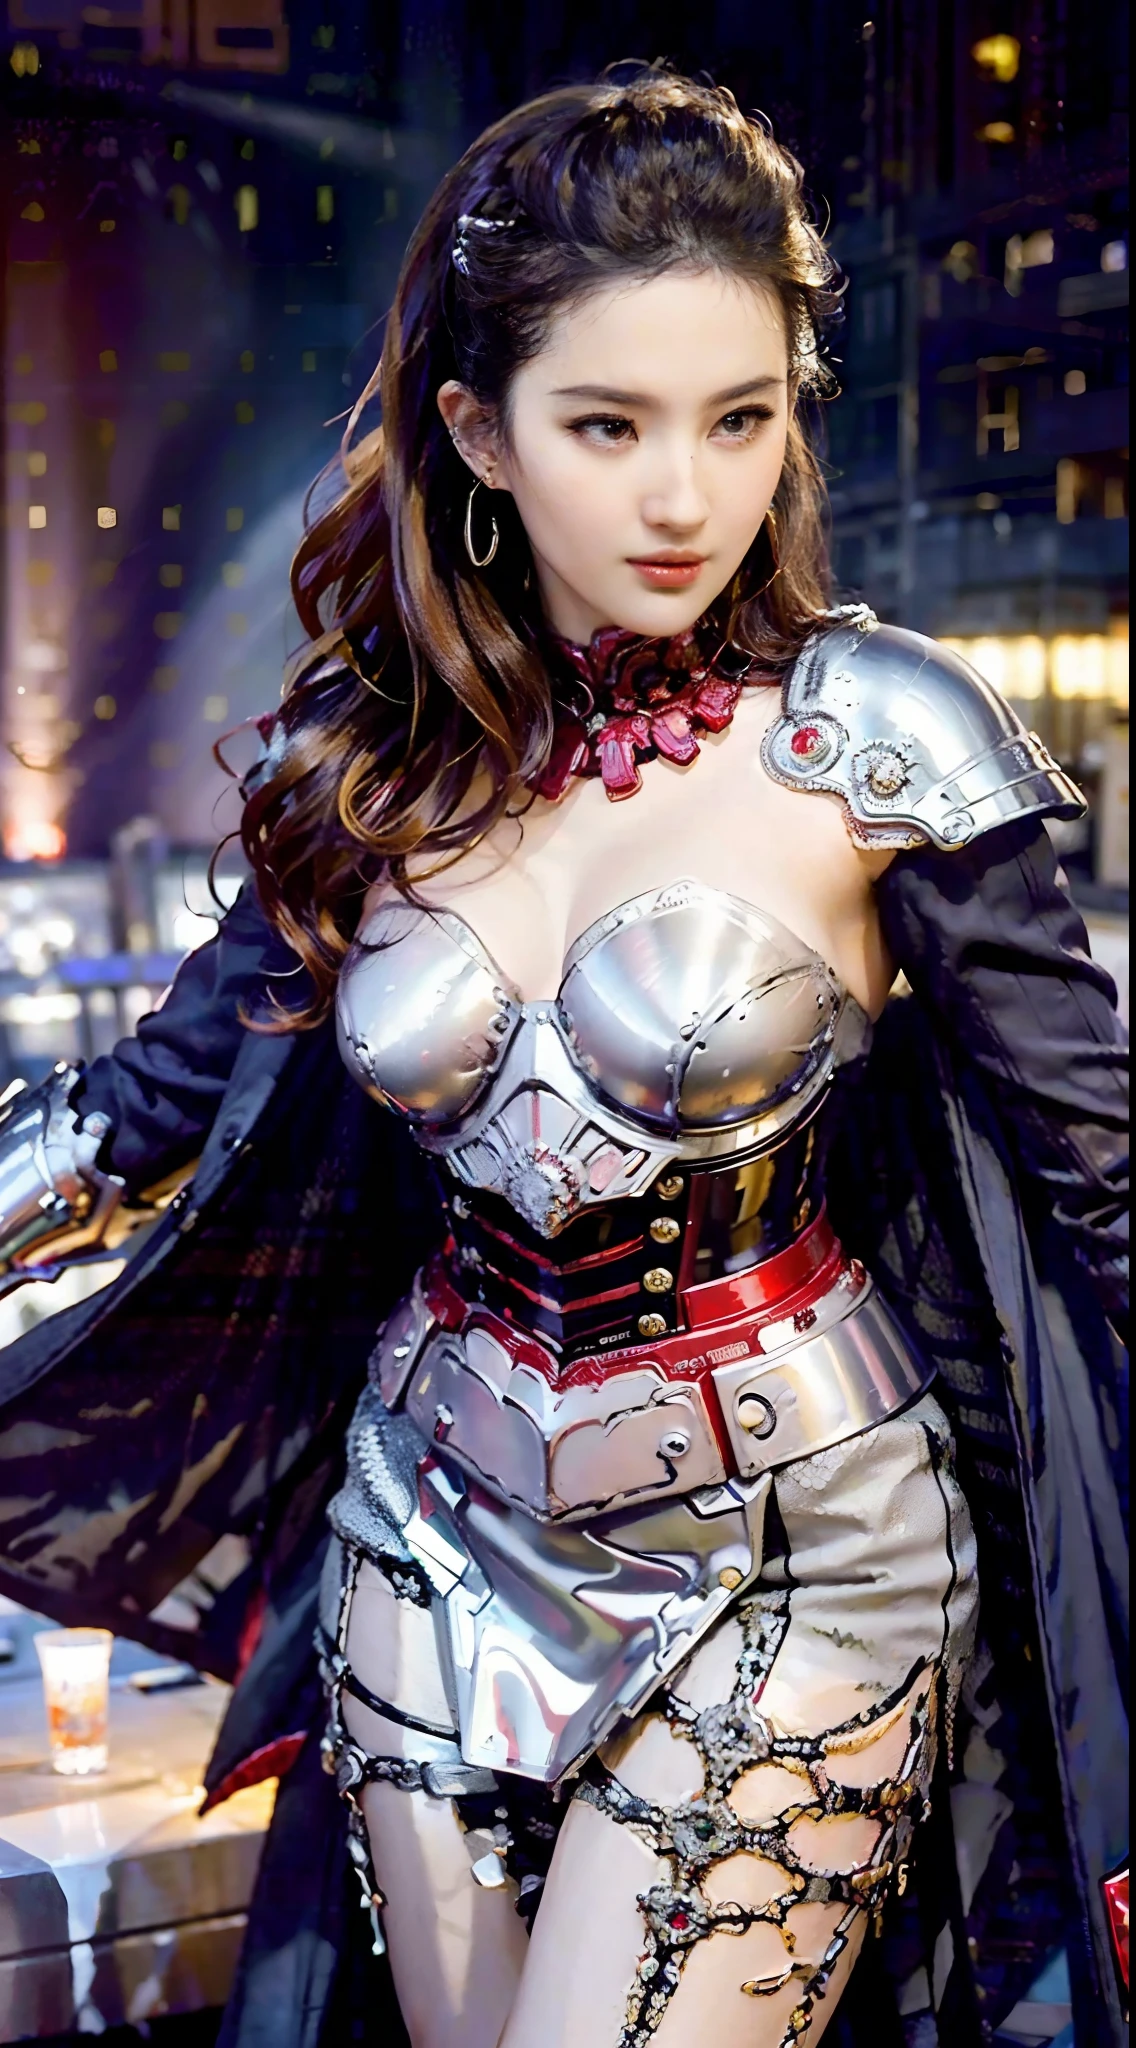 A woman wearing white and gold Iron Man armor， Mix 4, (8K, photo RAW, best qualityer, tmasterpiece: 1.2), (realisticlying, realisticlying: 1.37), 1girll, baik, The sci-fi city of the future, Rooftop, Sateen, dampness, profesional lighting, photon maping, Radio Siddard, physically-based renderingt, gradient brunette hair, short detailed hair, femele, Excellent image quality, A high resolution, 1080p,  Extreme light and shadow, hair messy, tmasterpiece, rich details​, (Exquisite facial features), (high-level image quality), (tmasterpiece), (A detailed eye), Looking forward to your eyes, (((Ruby set on armor，)))，Cowboy fighting pose，